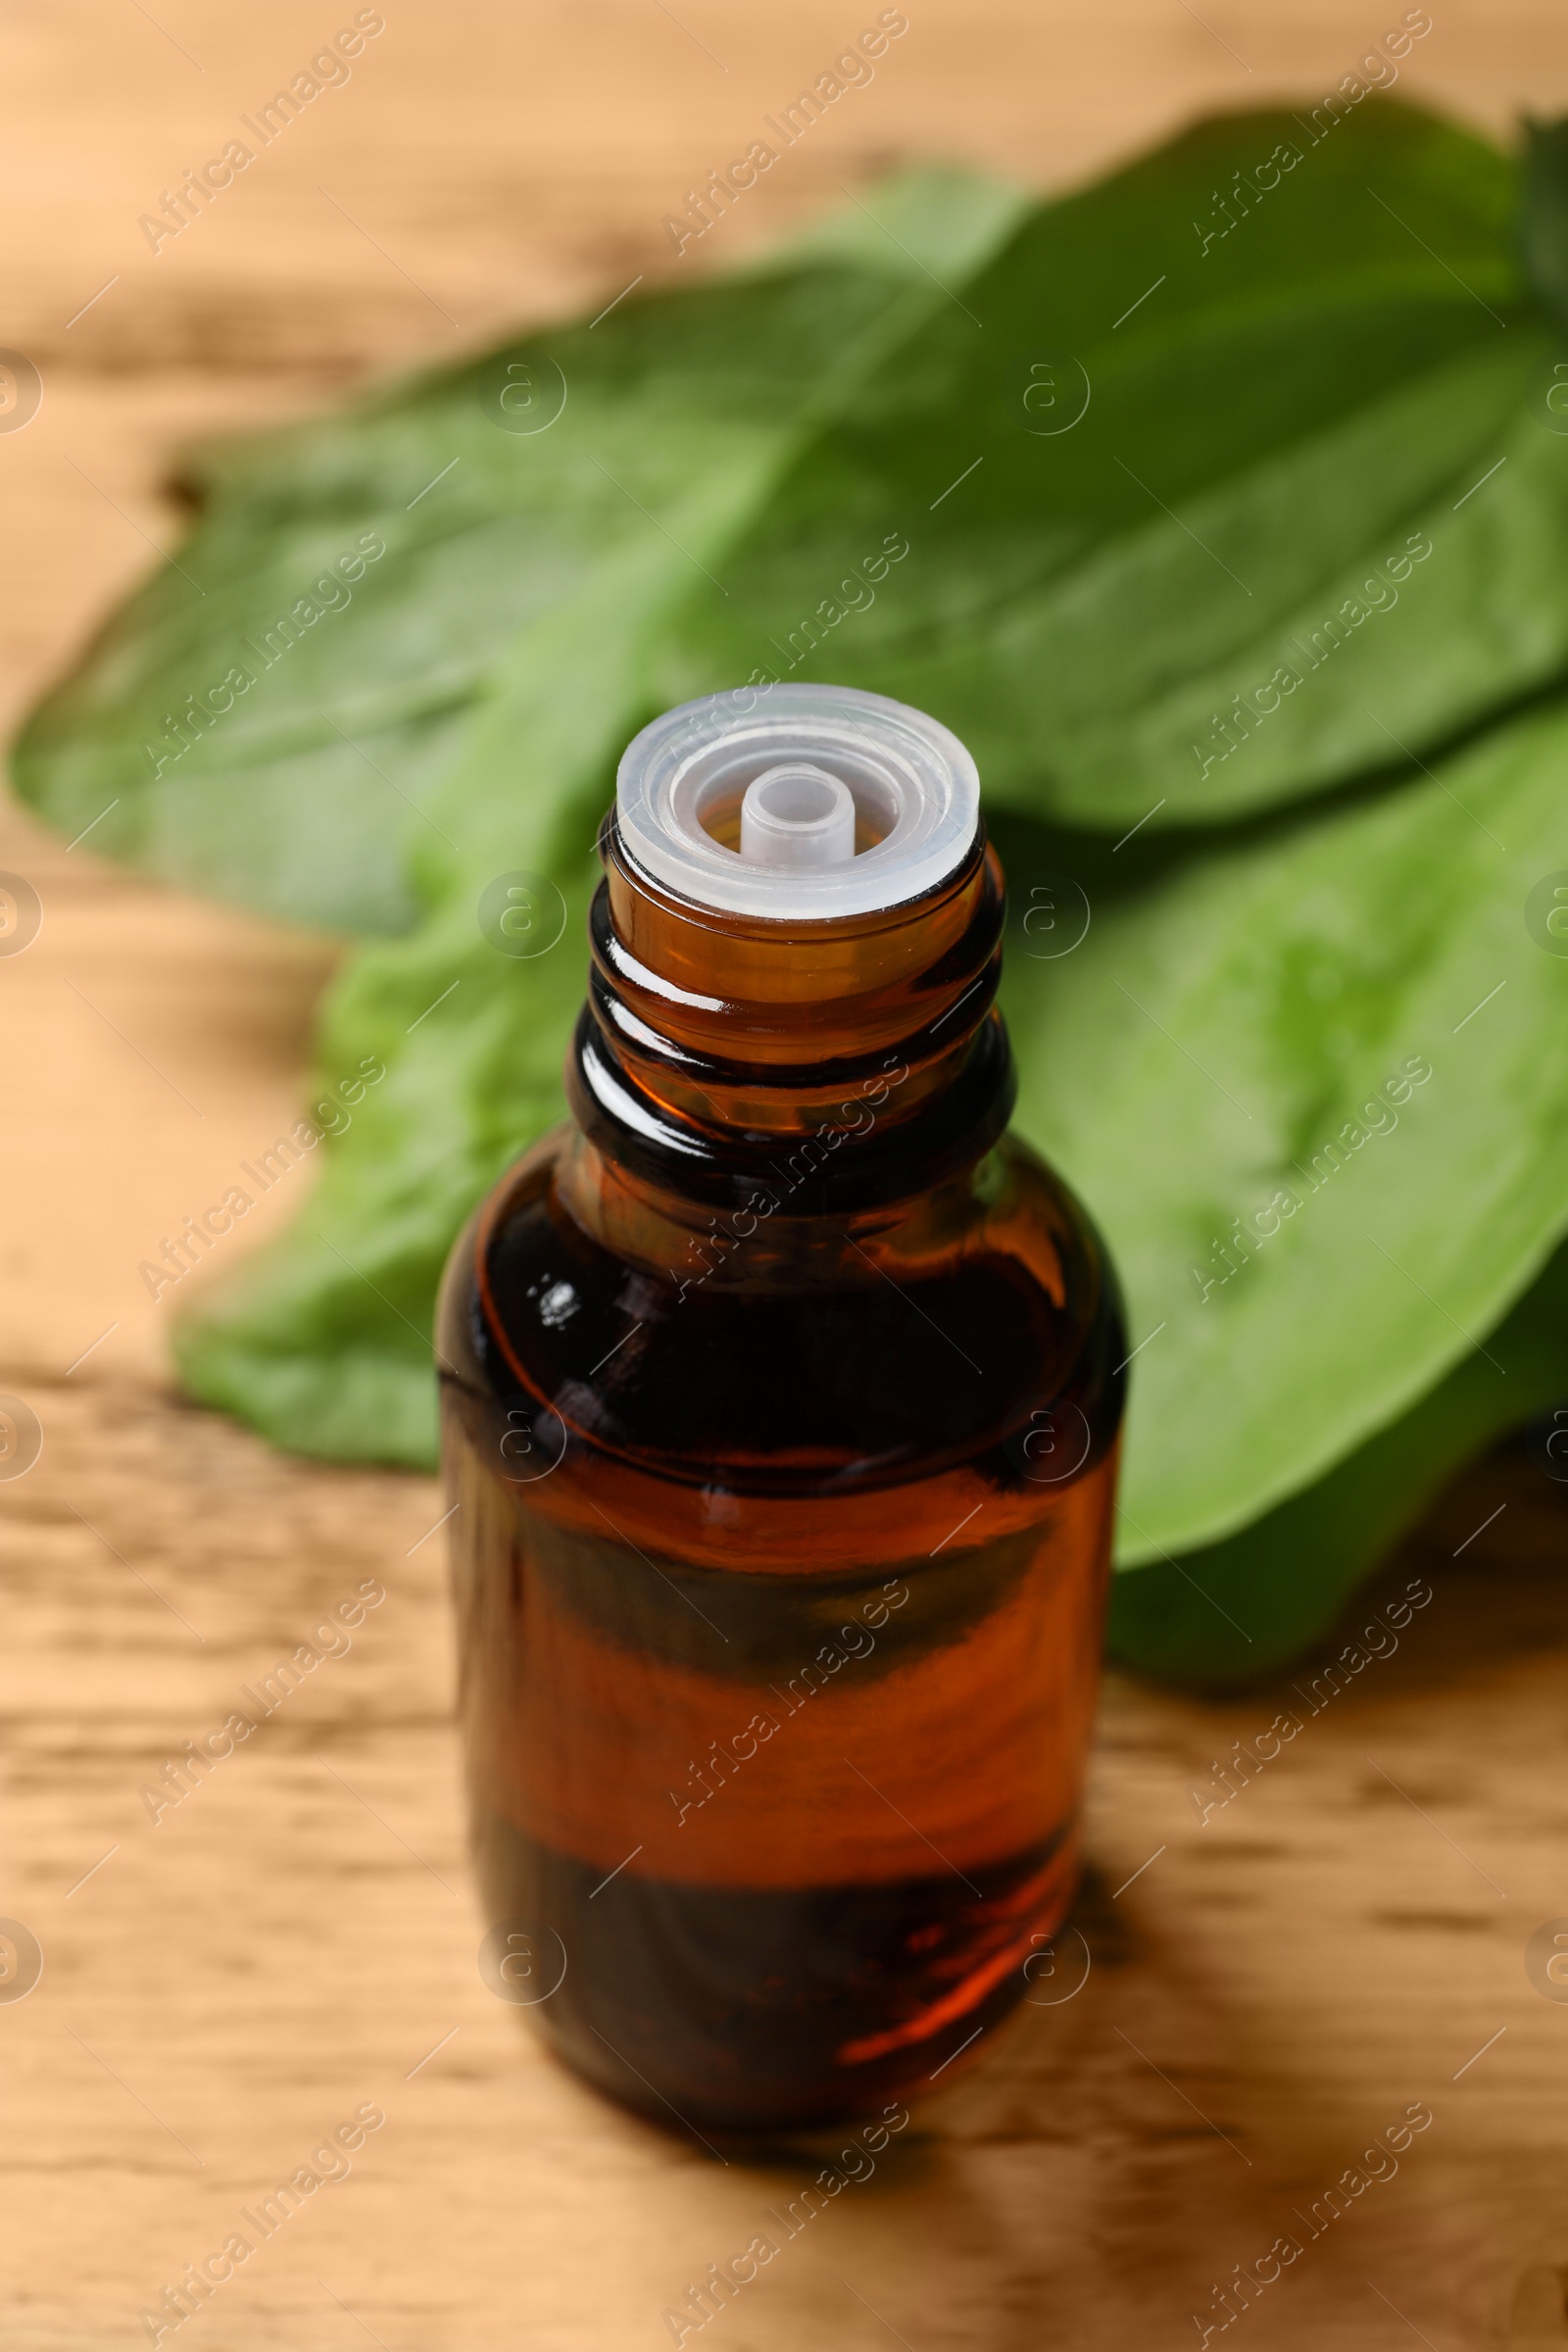 Photo of Bottle of broadleaf plantain extract and leaves on wooden table